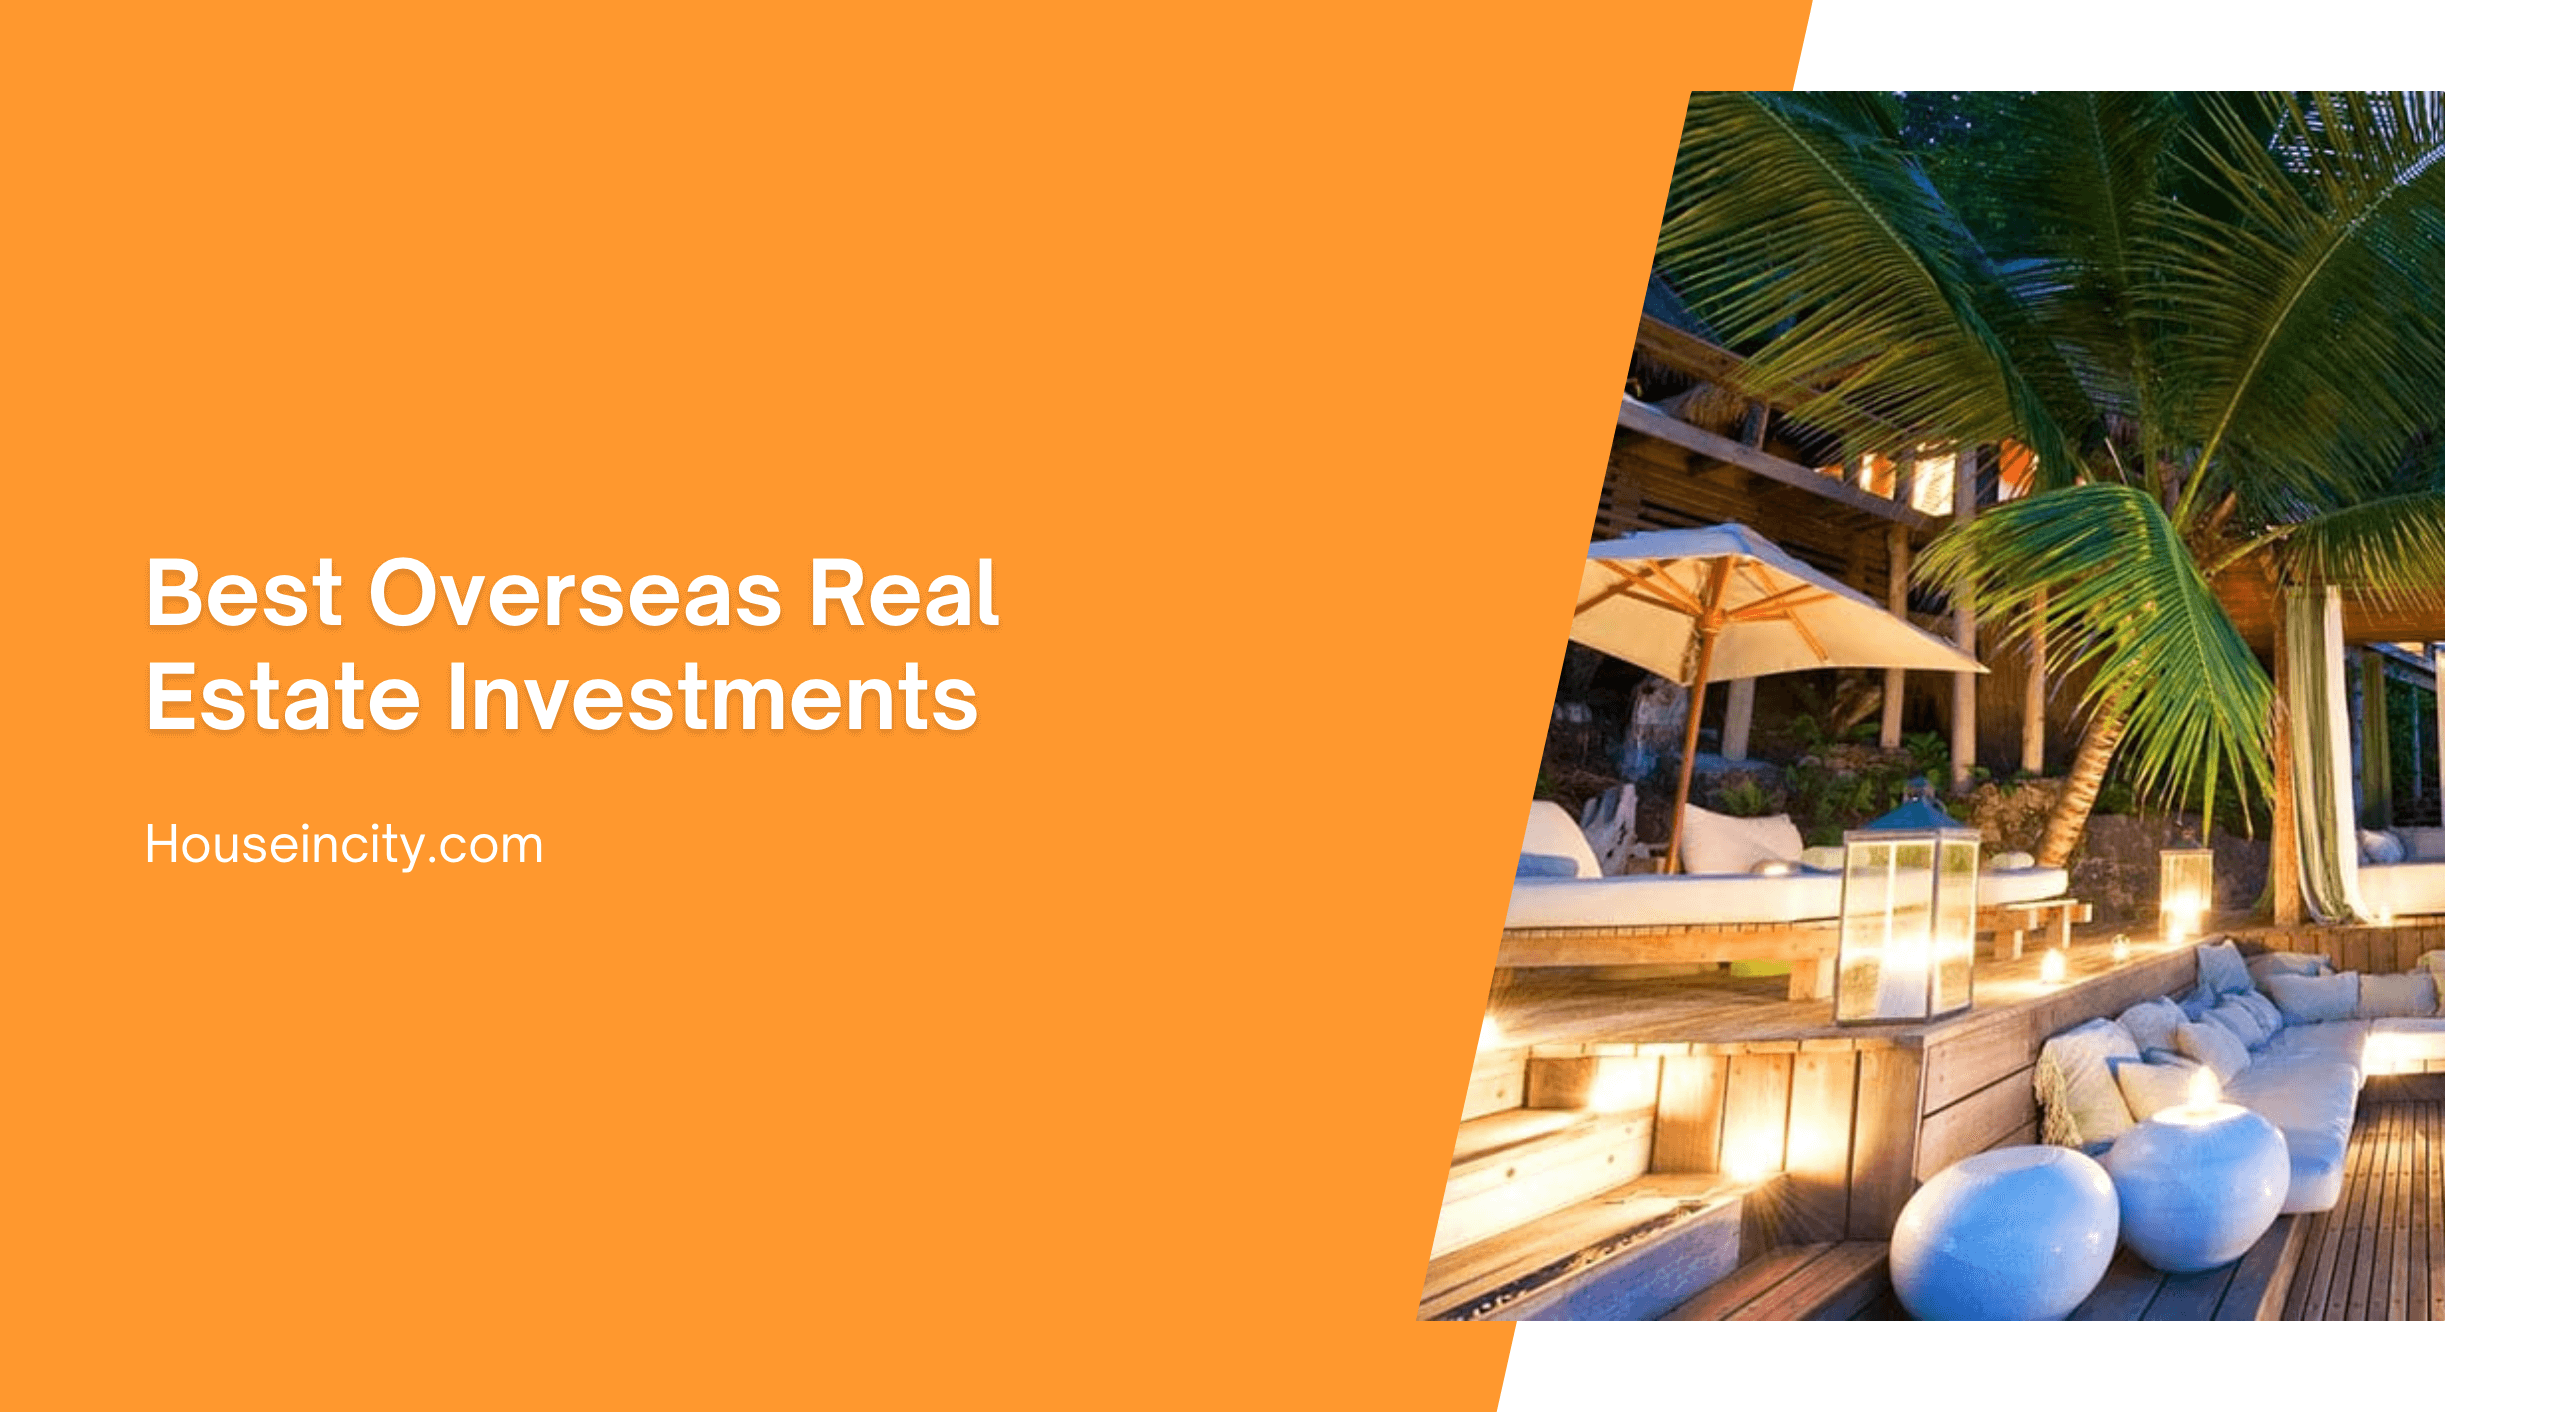 Best Overseas Real Estate Investments